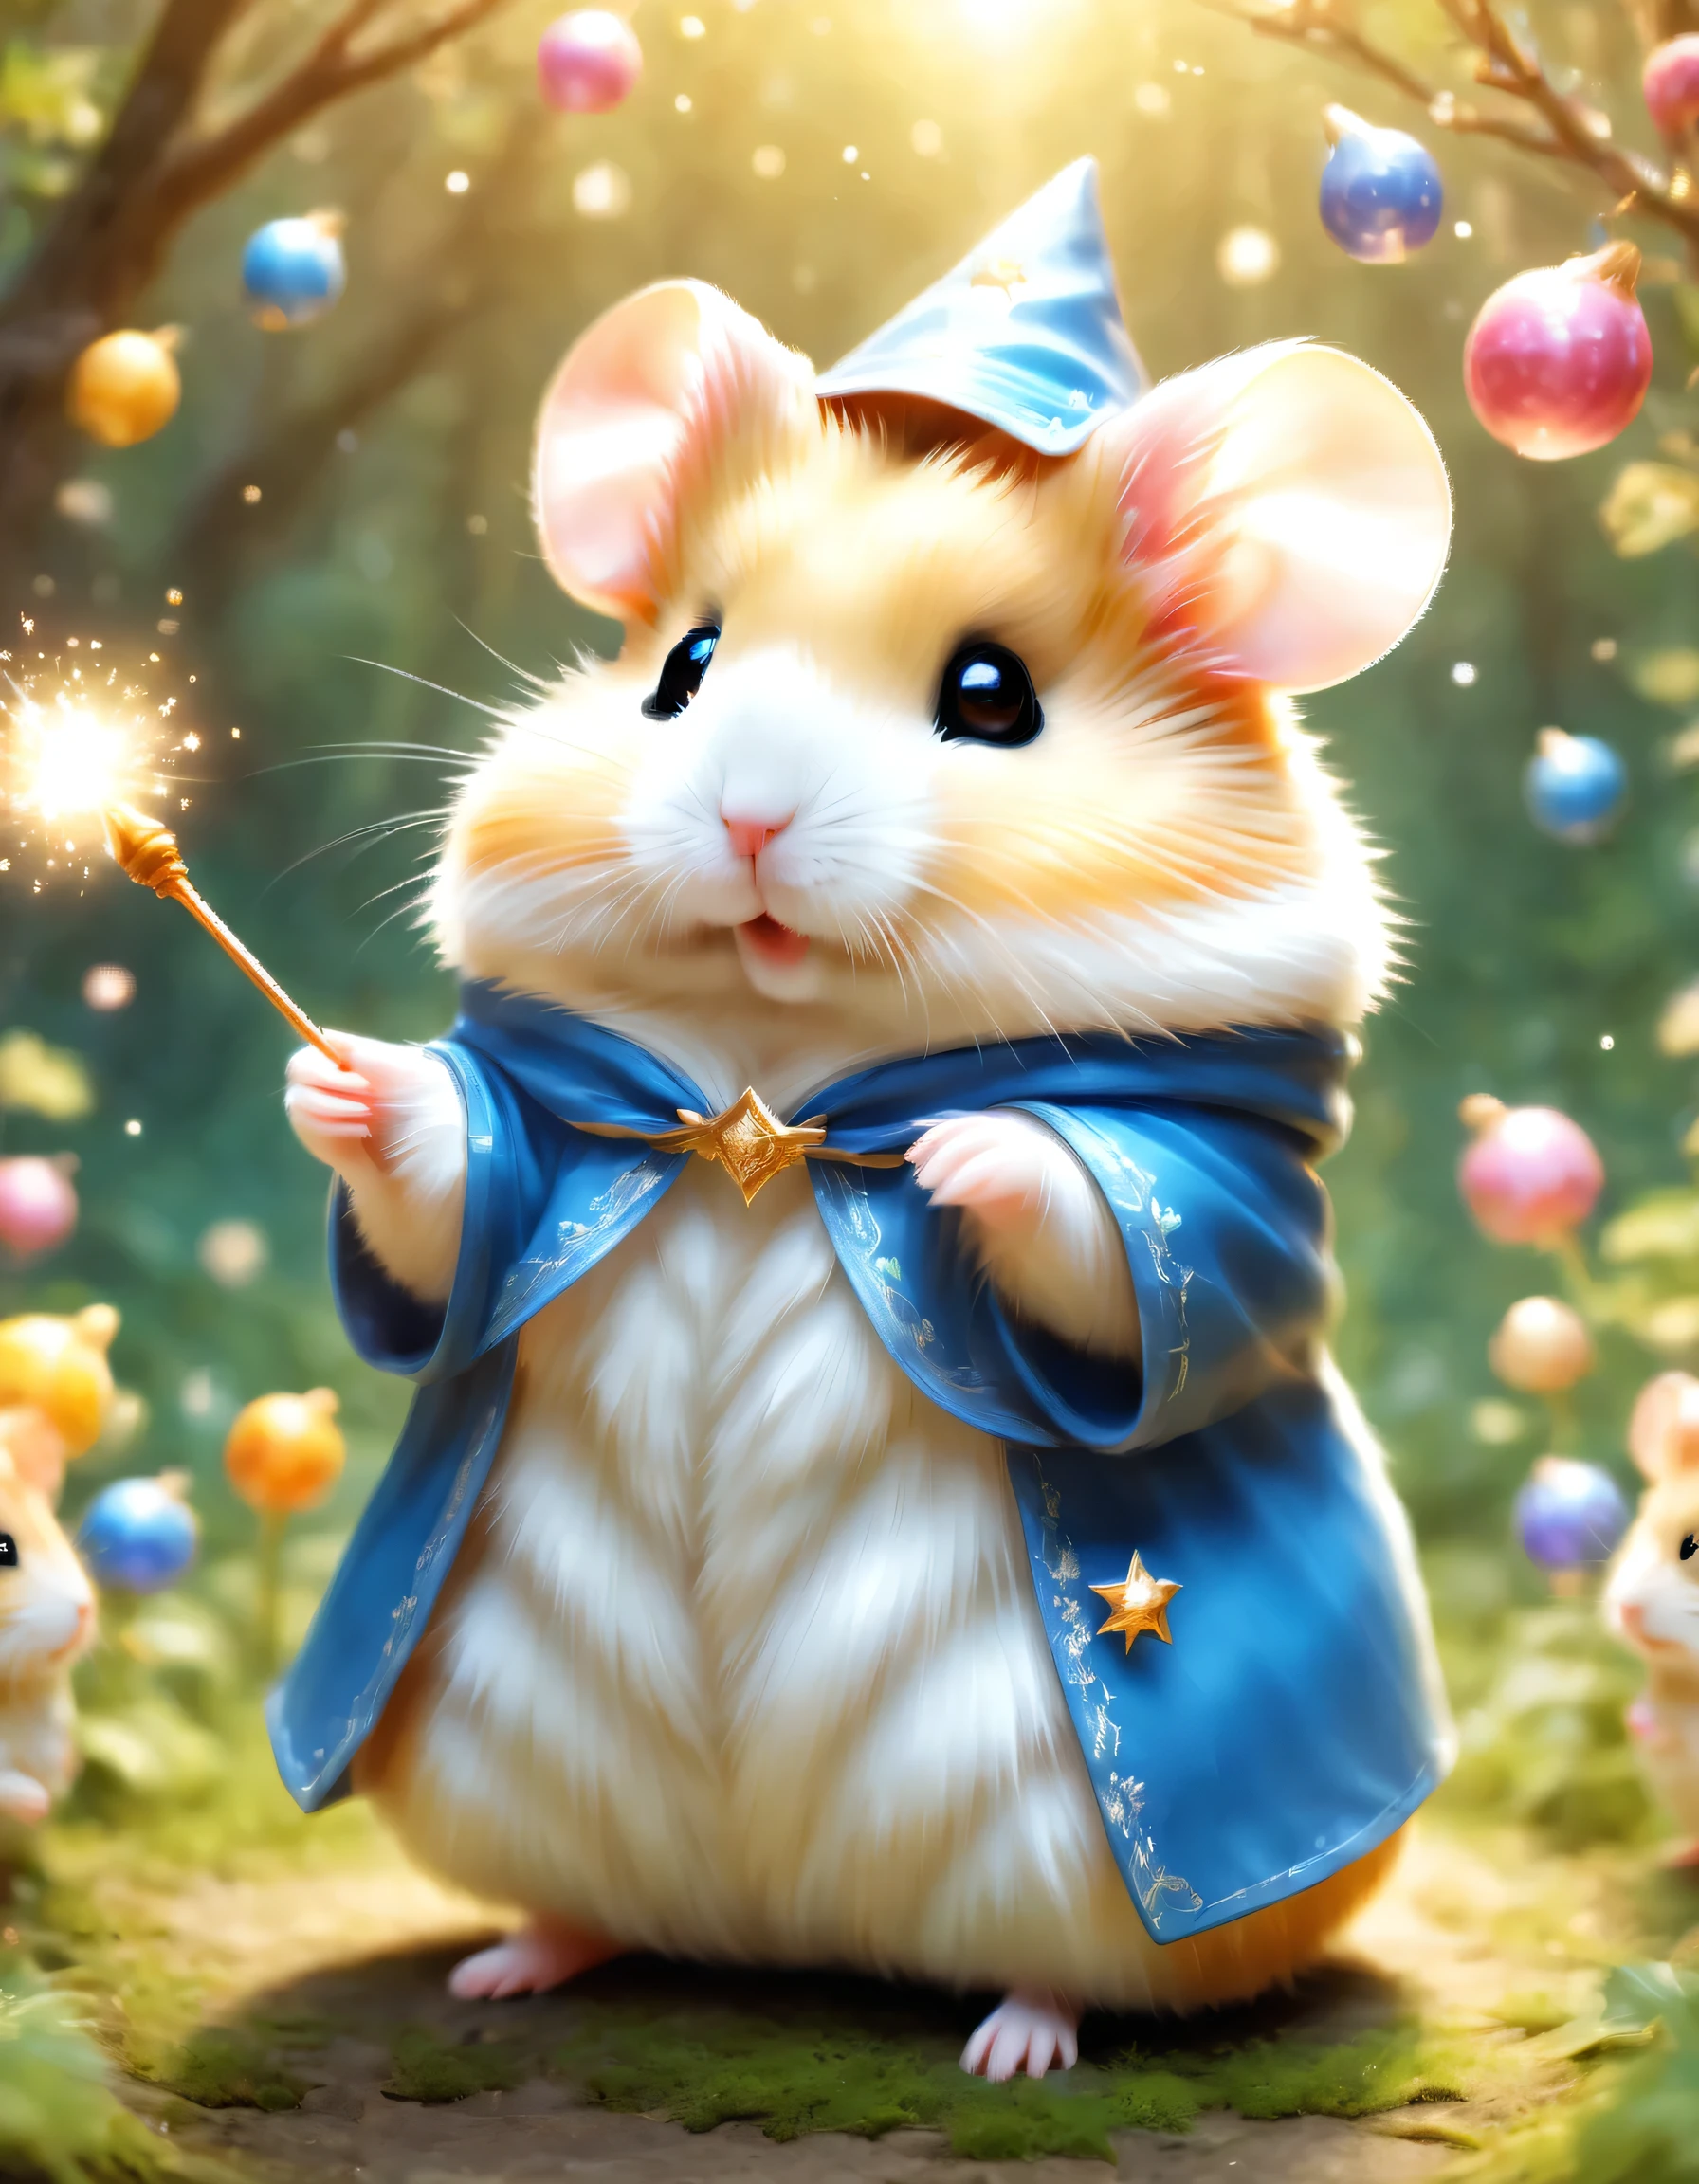 ((Dance Hamster)),((Confetti)),dance,Please raise your hand,Jump,Open your mouth,indoor,masterpiece,highest quality,Fluffy Hamster,a bit,cute,fun,happiness,,Stylish scenery,22.2 Shine,celebration,Anatomically correct,all the best,最高にCute hamster,Cute hamster，,Fantasy,Randolph Caldecott Style,Consciousness upward,watercolor,Gentle colors,((Confetti)),Shine,star,Light,Sequins,Crown,The king's cloak,Holding up the trophy,Fluffy Hamster,lame